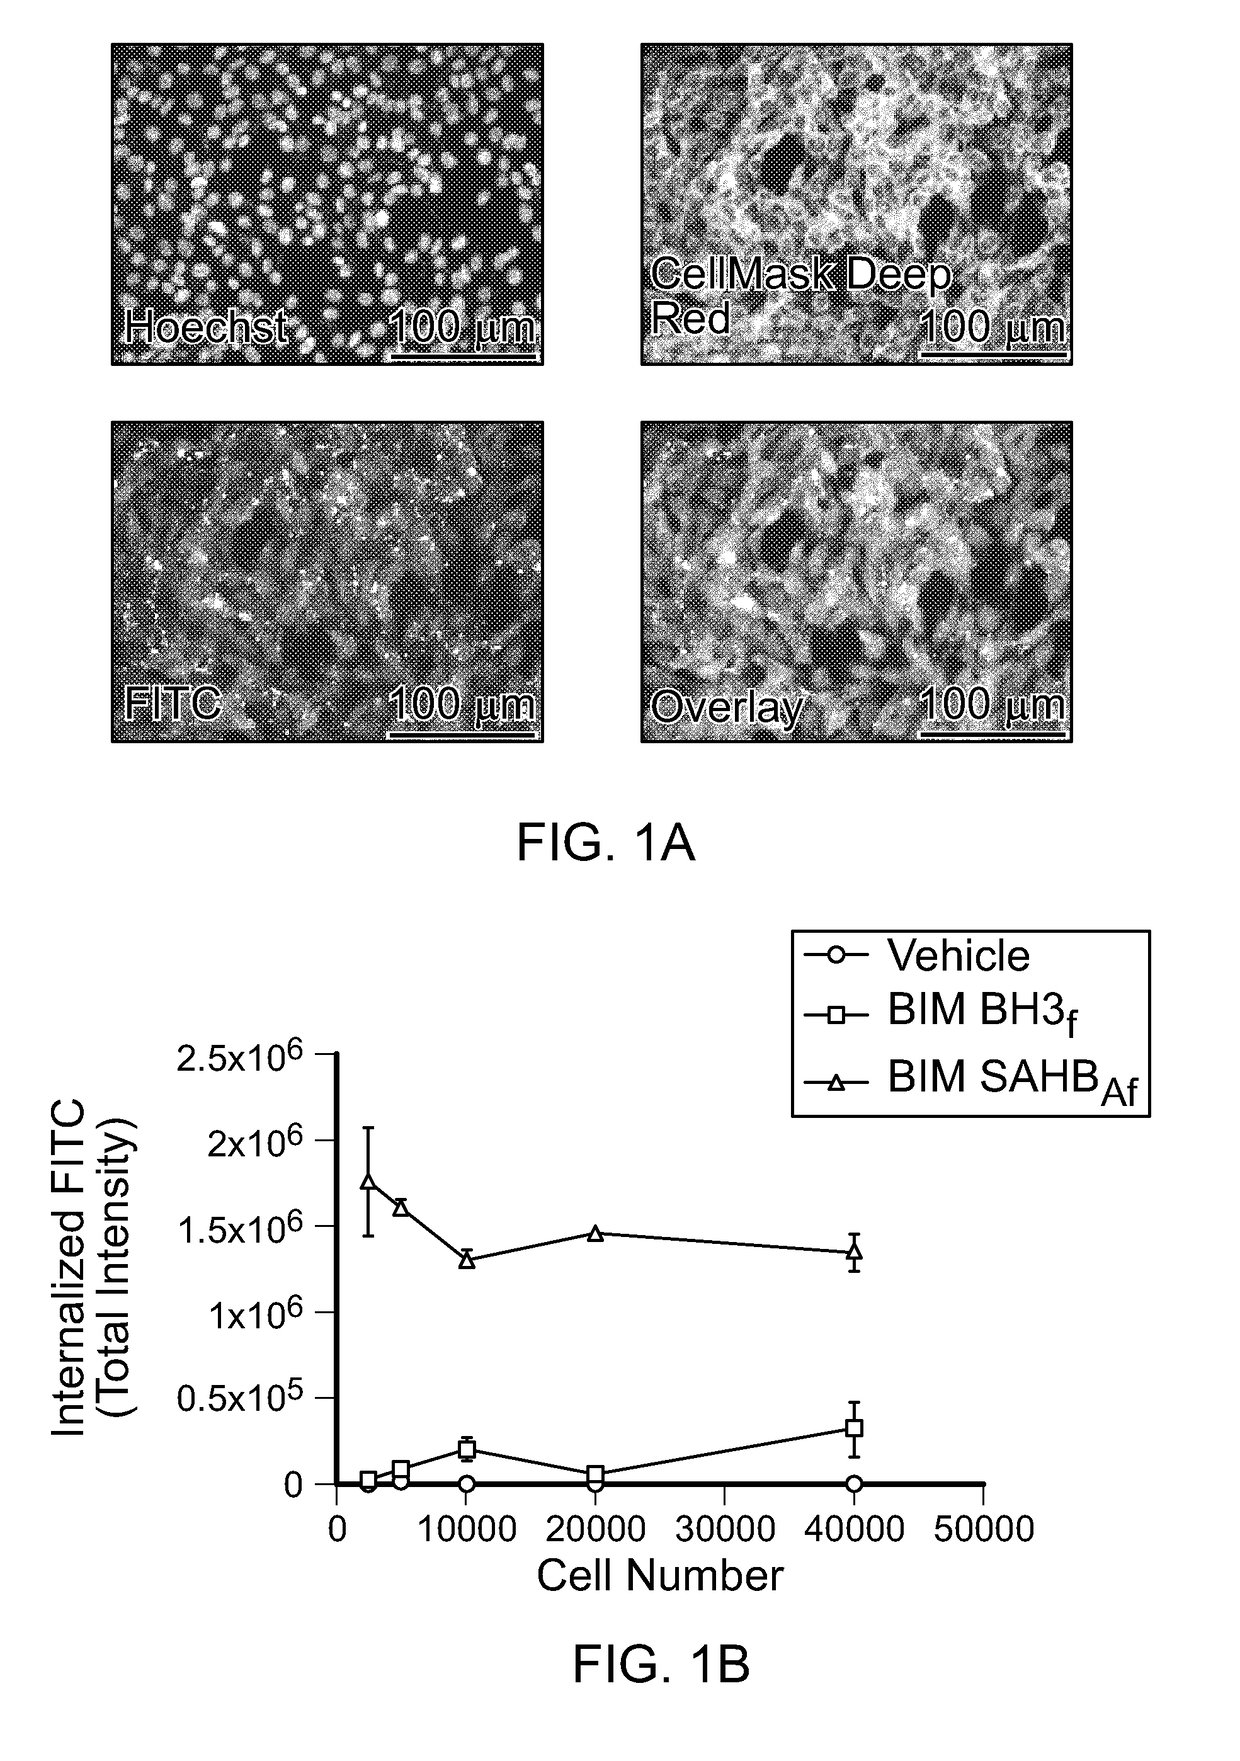 Method for generating cell-penetrating stapled peptides that lack nonspecific membrane-lytic properties for therapeutic targeting